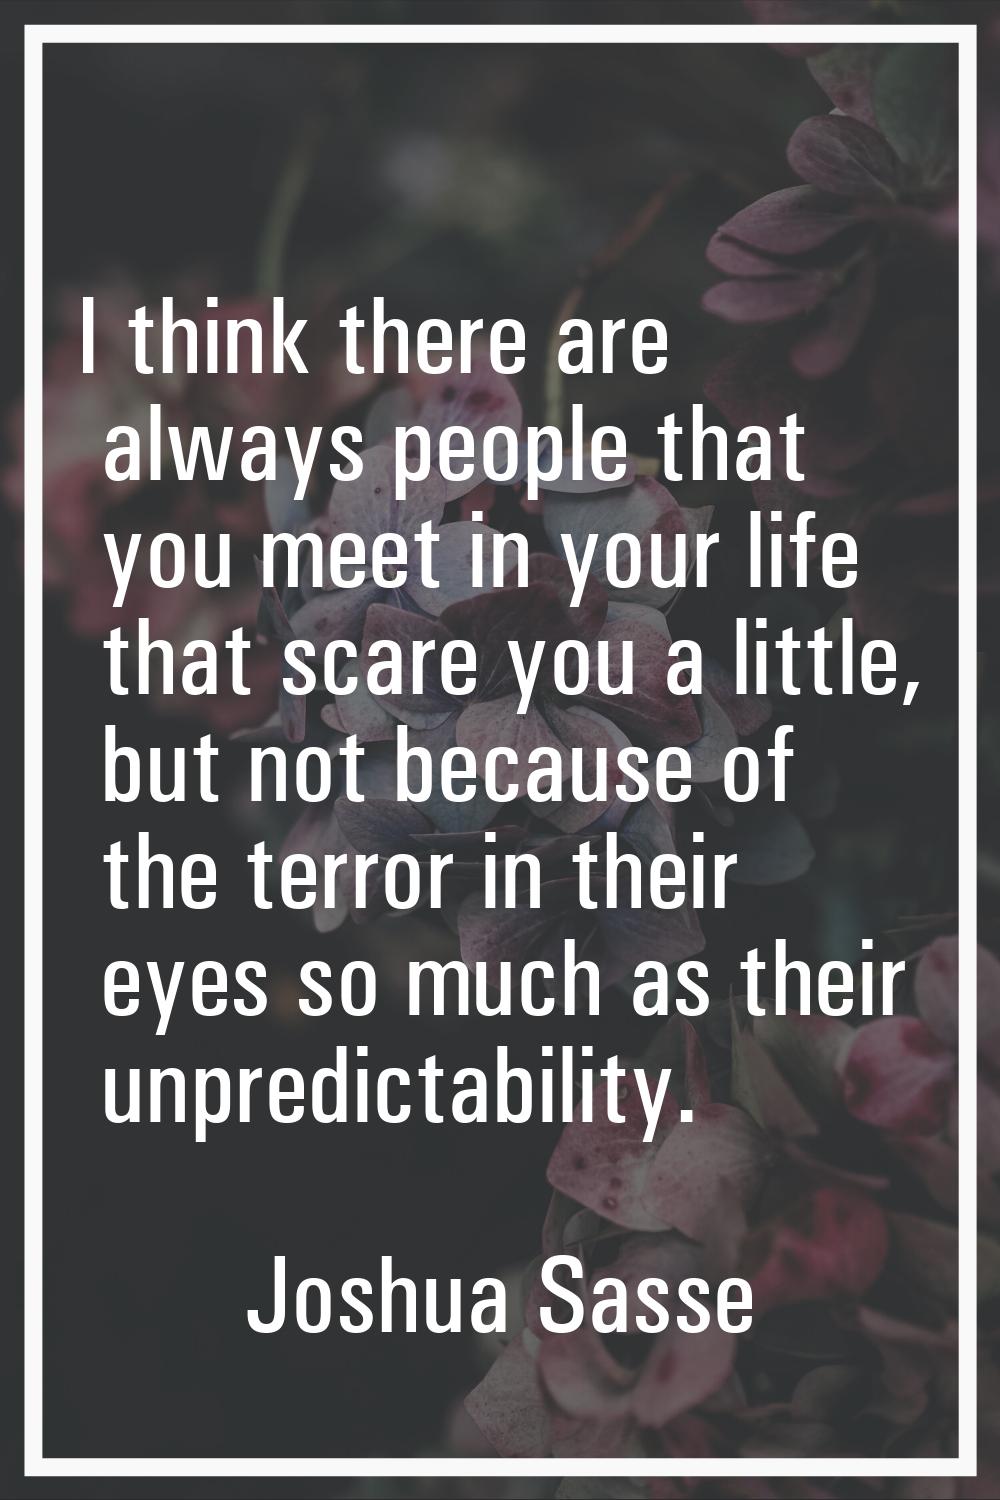 I think there are always people that you meet in your life that scare you a little, but not because